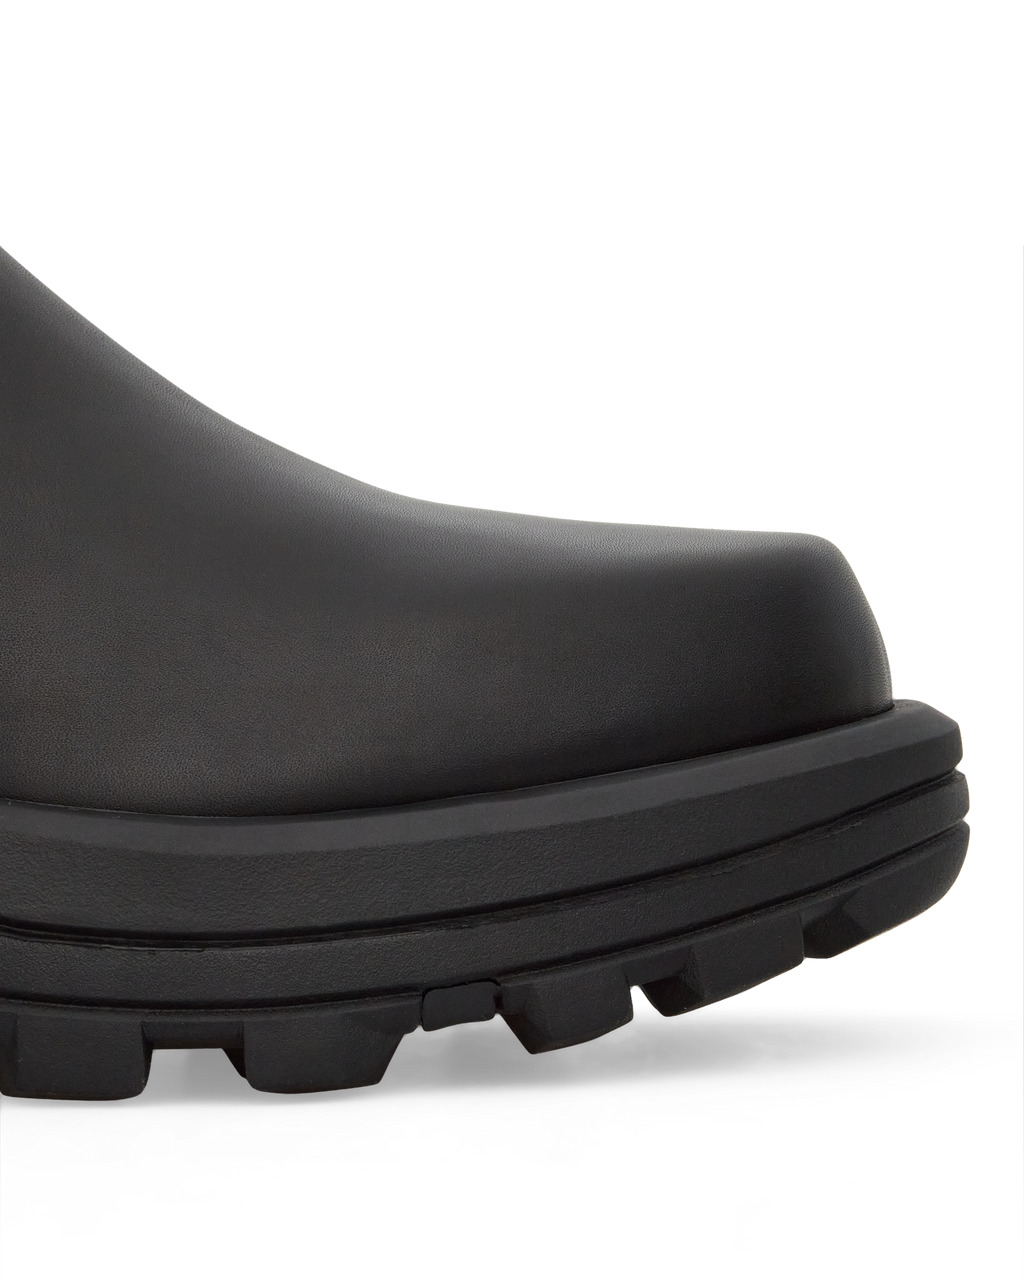 CHELSEA BOOT W/ REMOVABLE SKX SOLE - 7